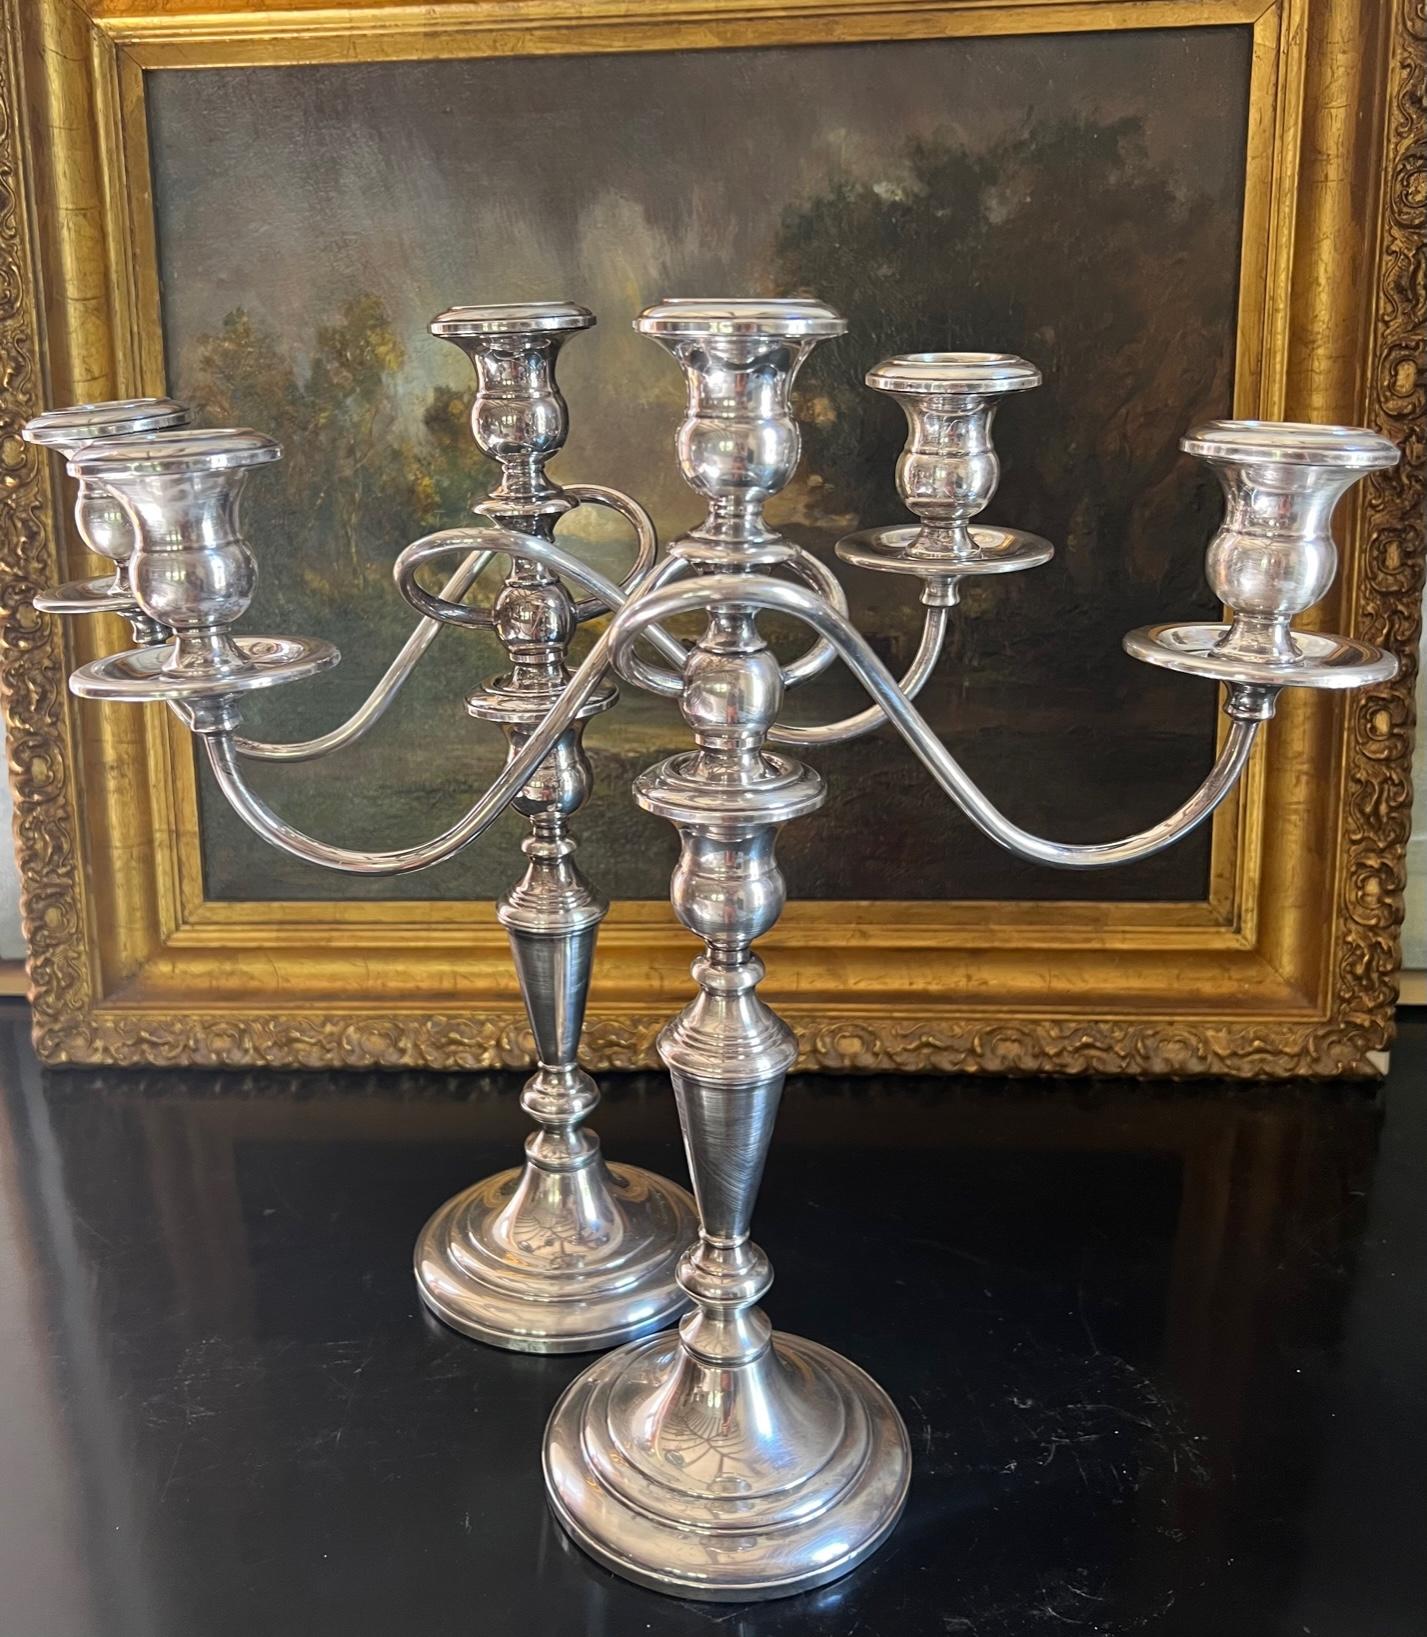 Pair of two convertible sterling weighted candelabras made in the New Jersey by the Fisher Silversmiths company in the mid 20th century. The candlesticks convert four different ways for different looks.

Each is stamped Fisher Sterling Weighted 353